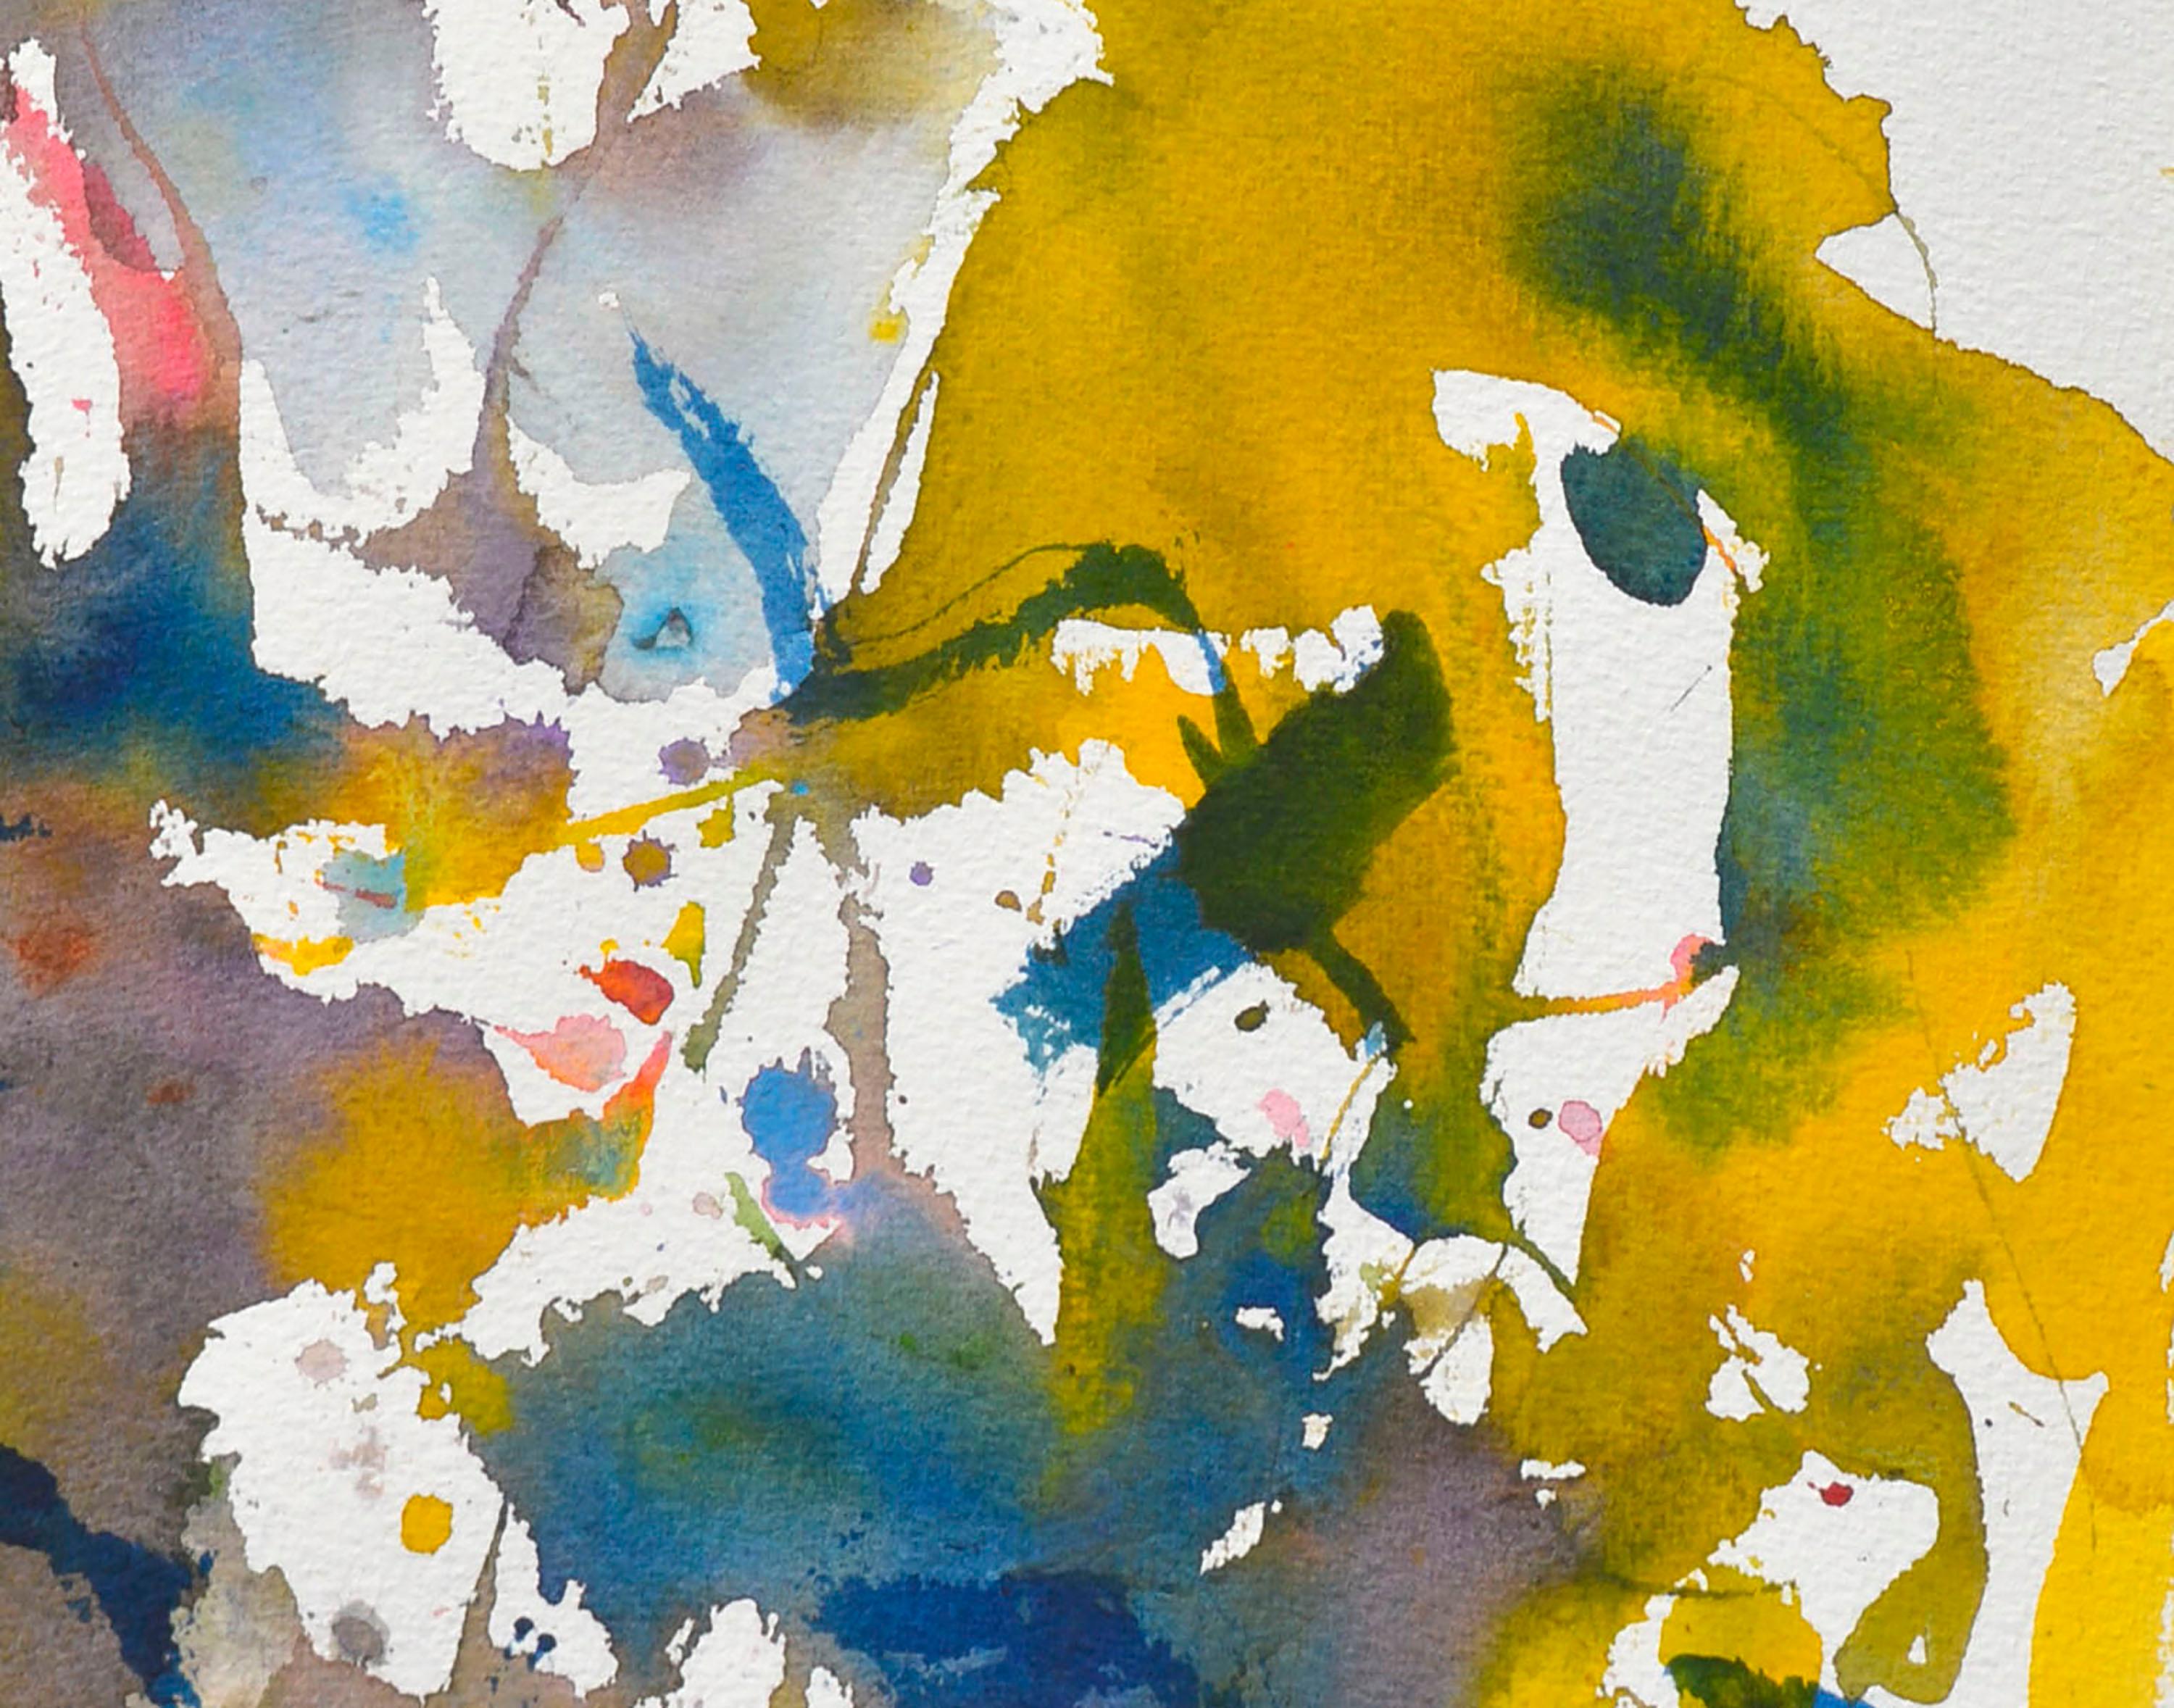 Blue & yellow abstract watercolor by Les (Leslie Luverne) Anderson (American, 1928-2009). From the estate of Les Anderson in Monterey, California. Signed on verso and unframed. Image 10